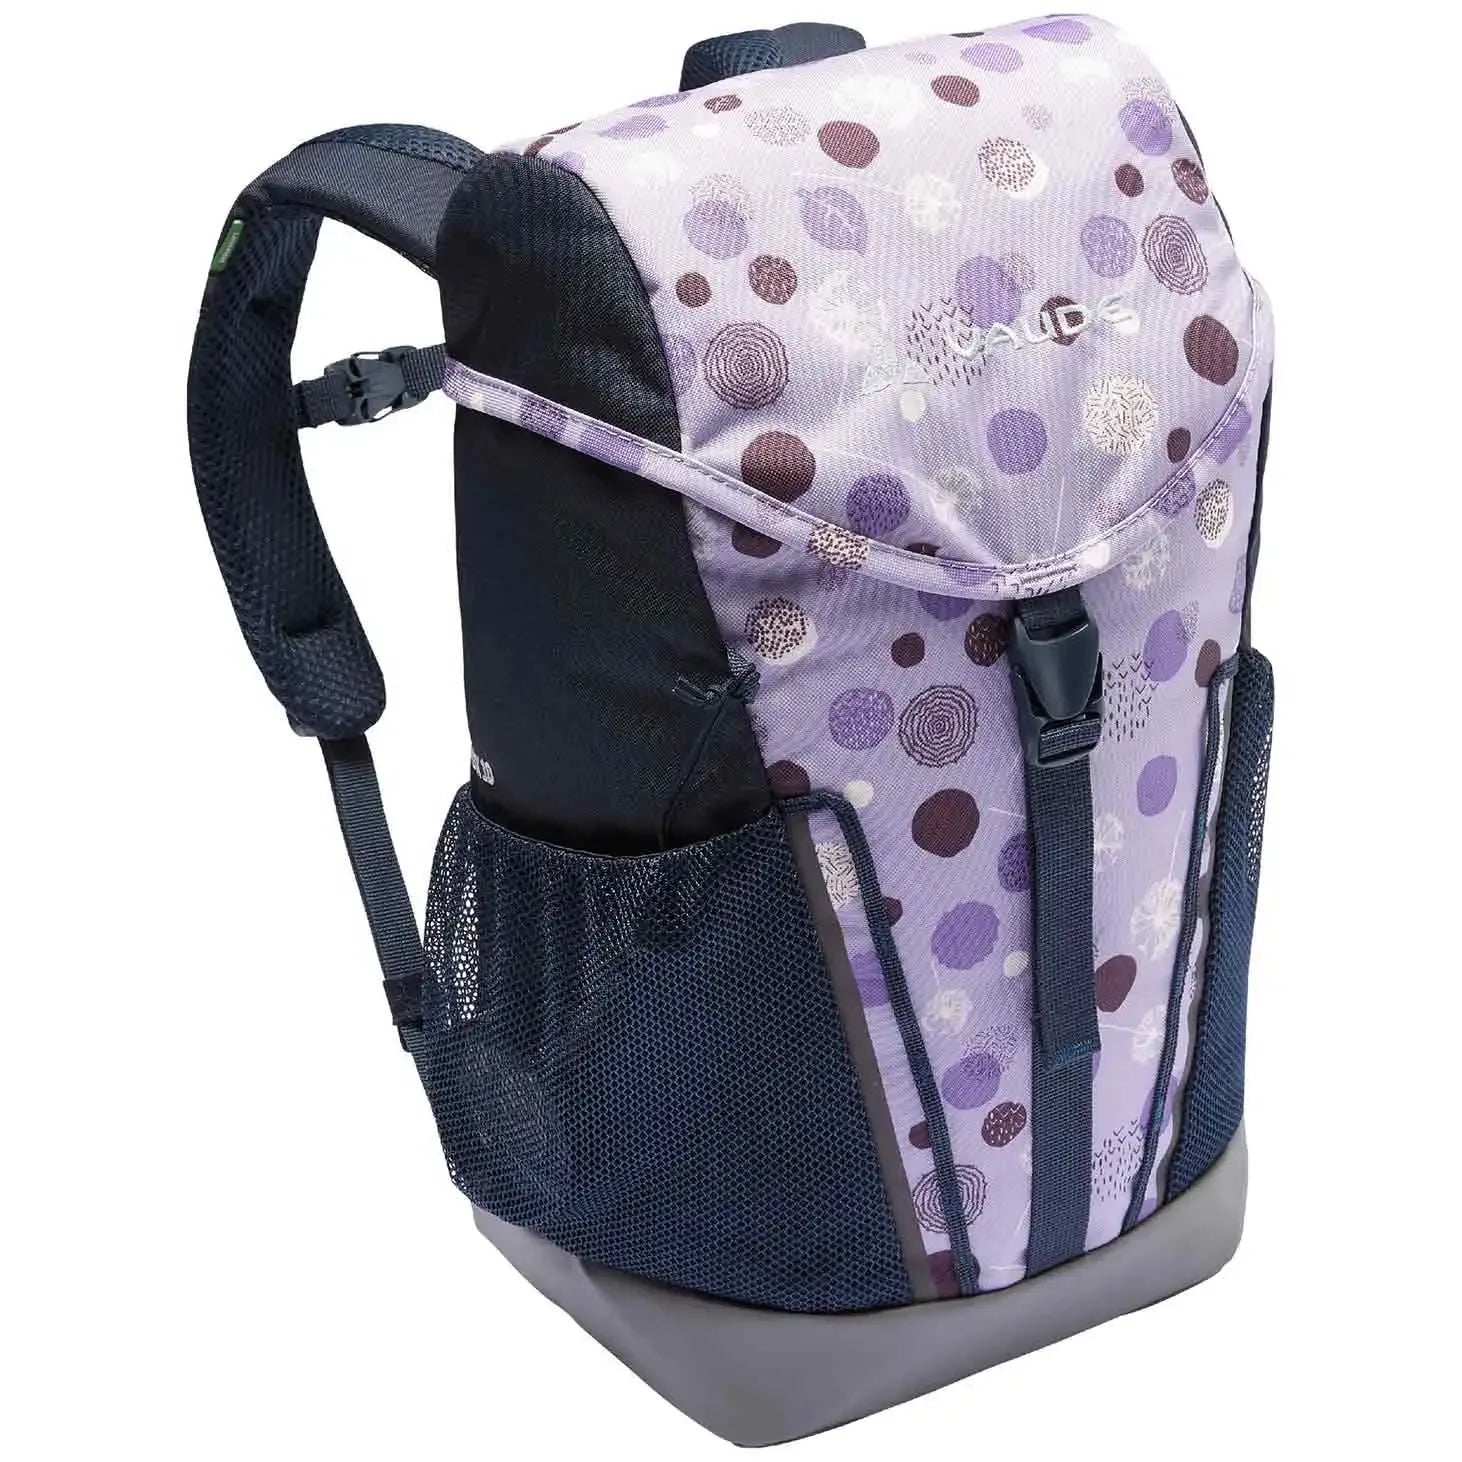 Vaude Family Puck 10 children's backpack 38 cm - pastel lilac